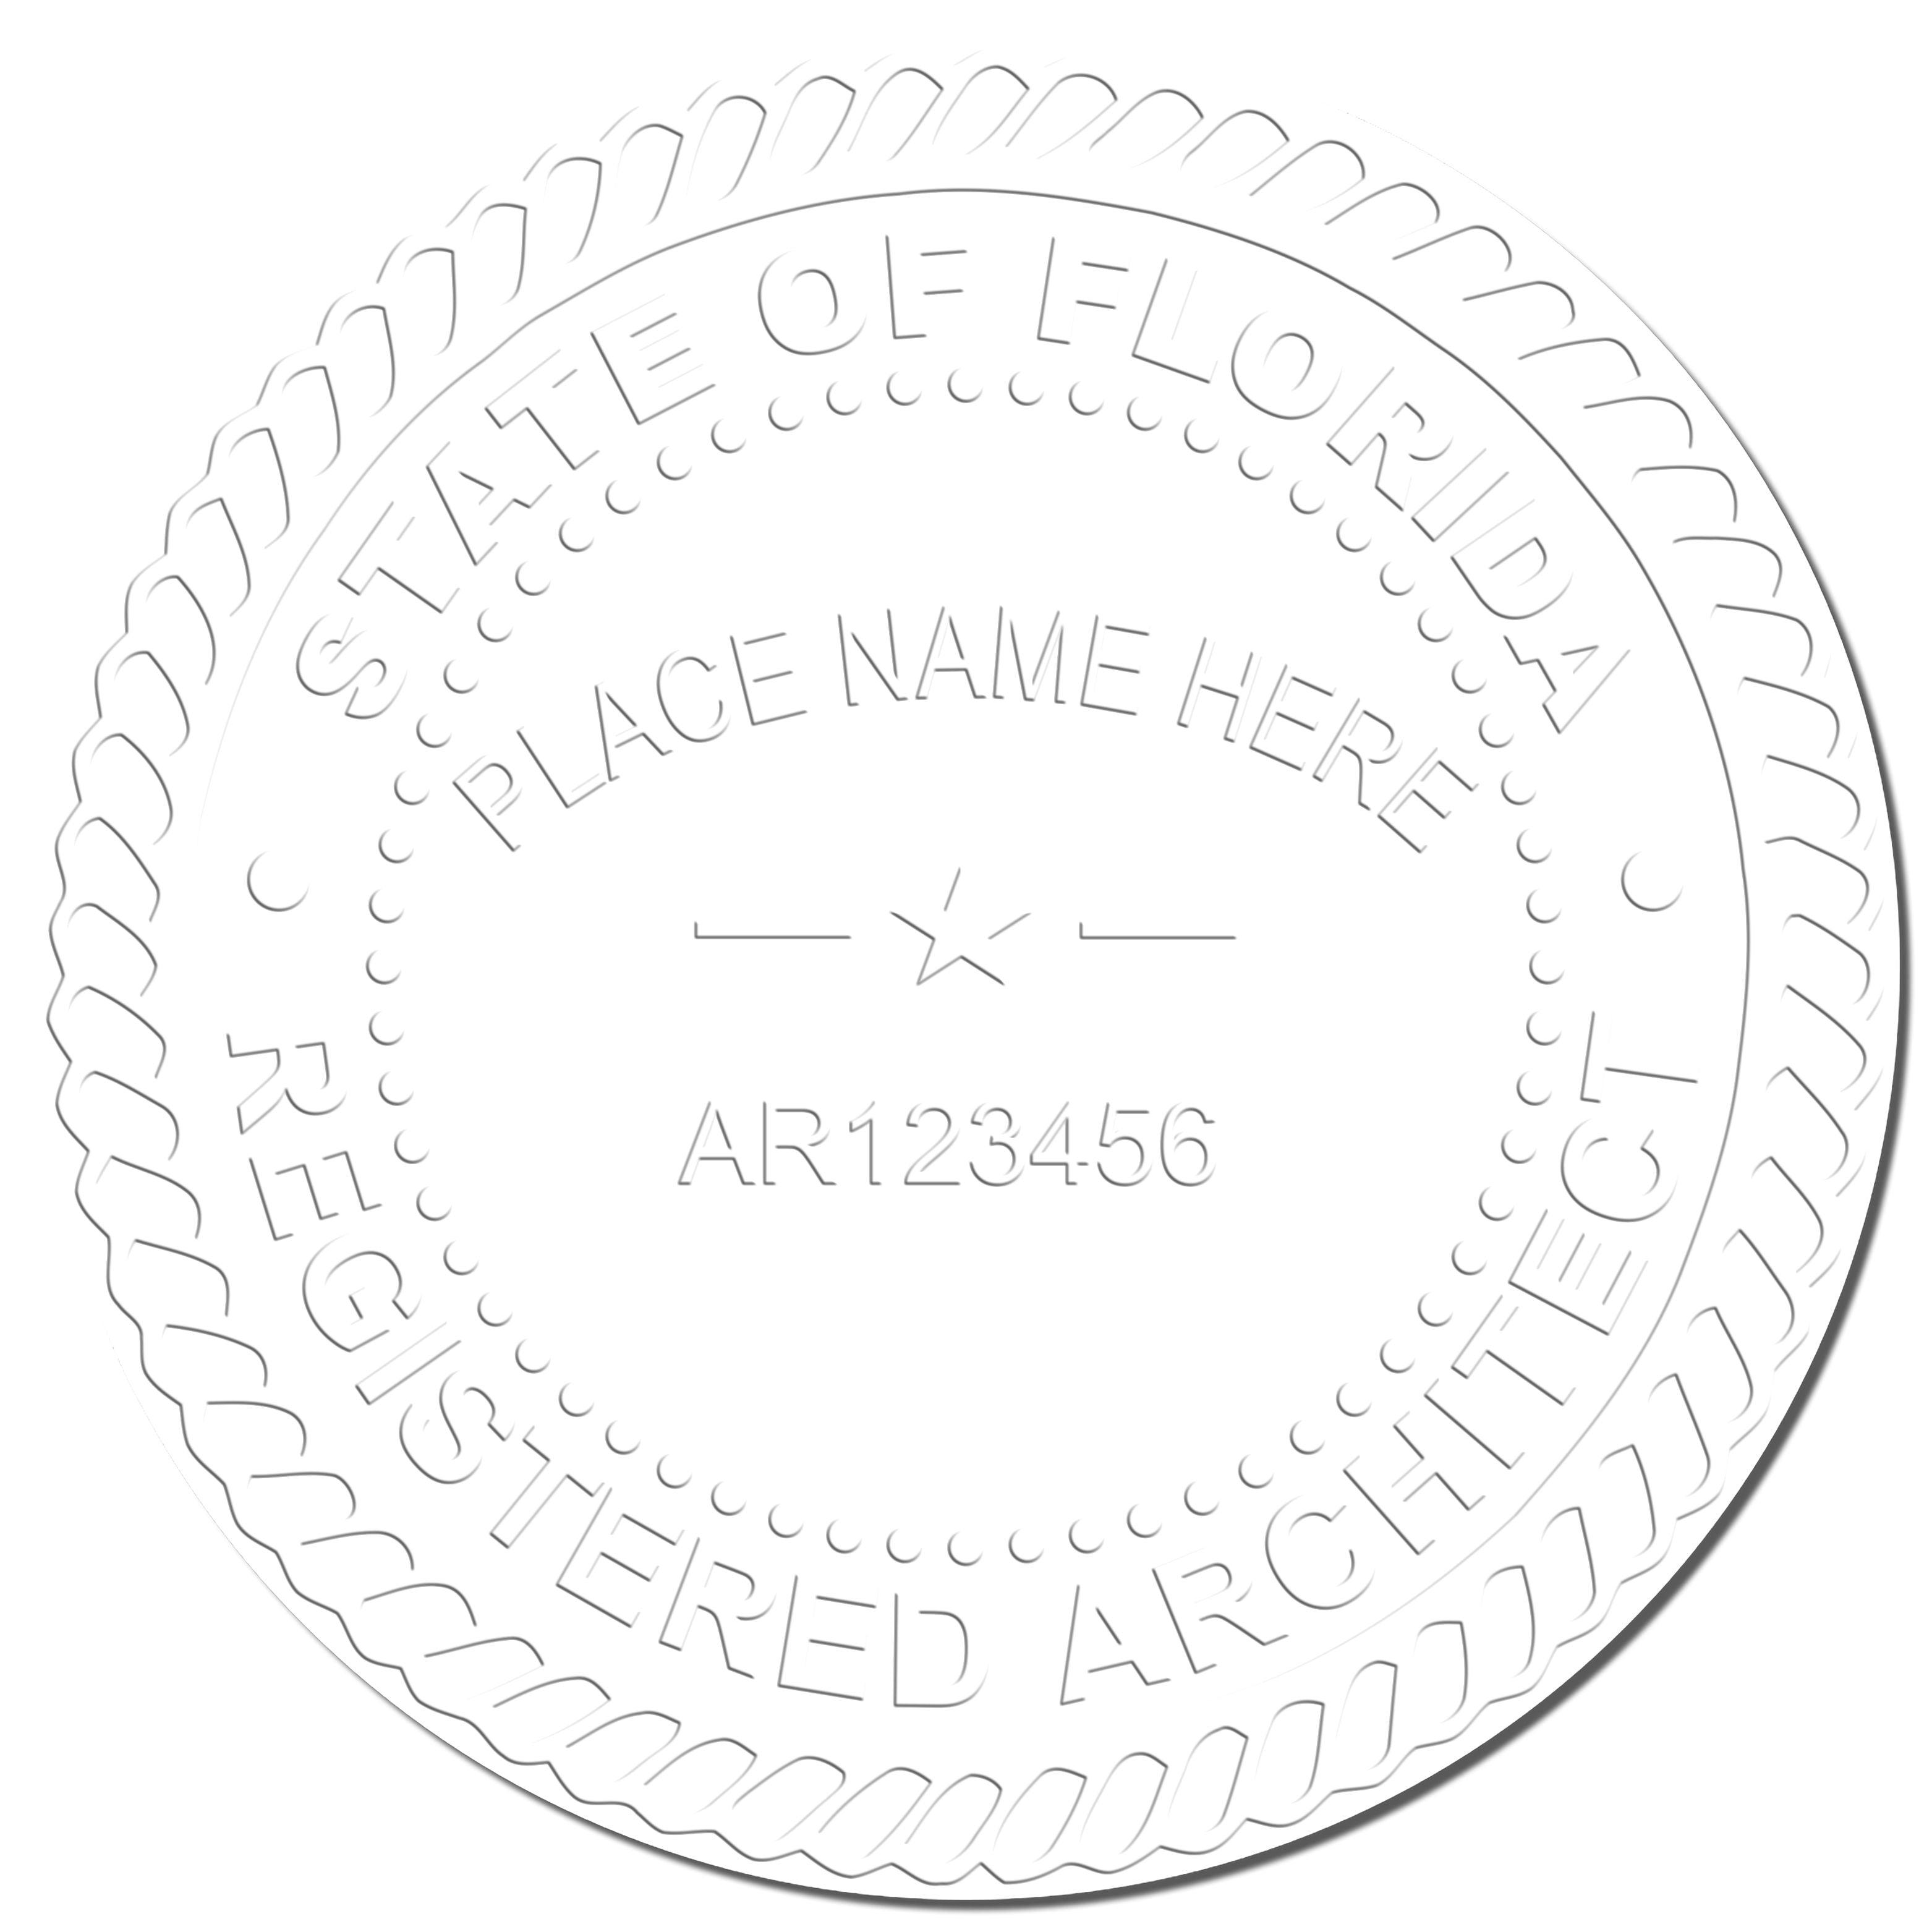 This paper is stamped with a sample imprint of the State of Florida Architectural Seal Embosser, signifying its quality and reliability.